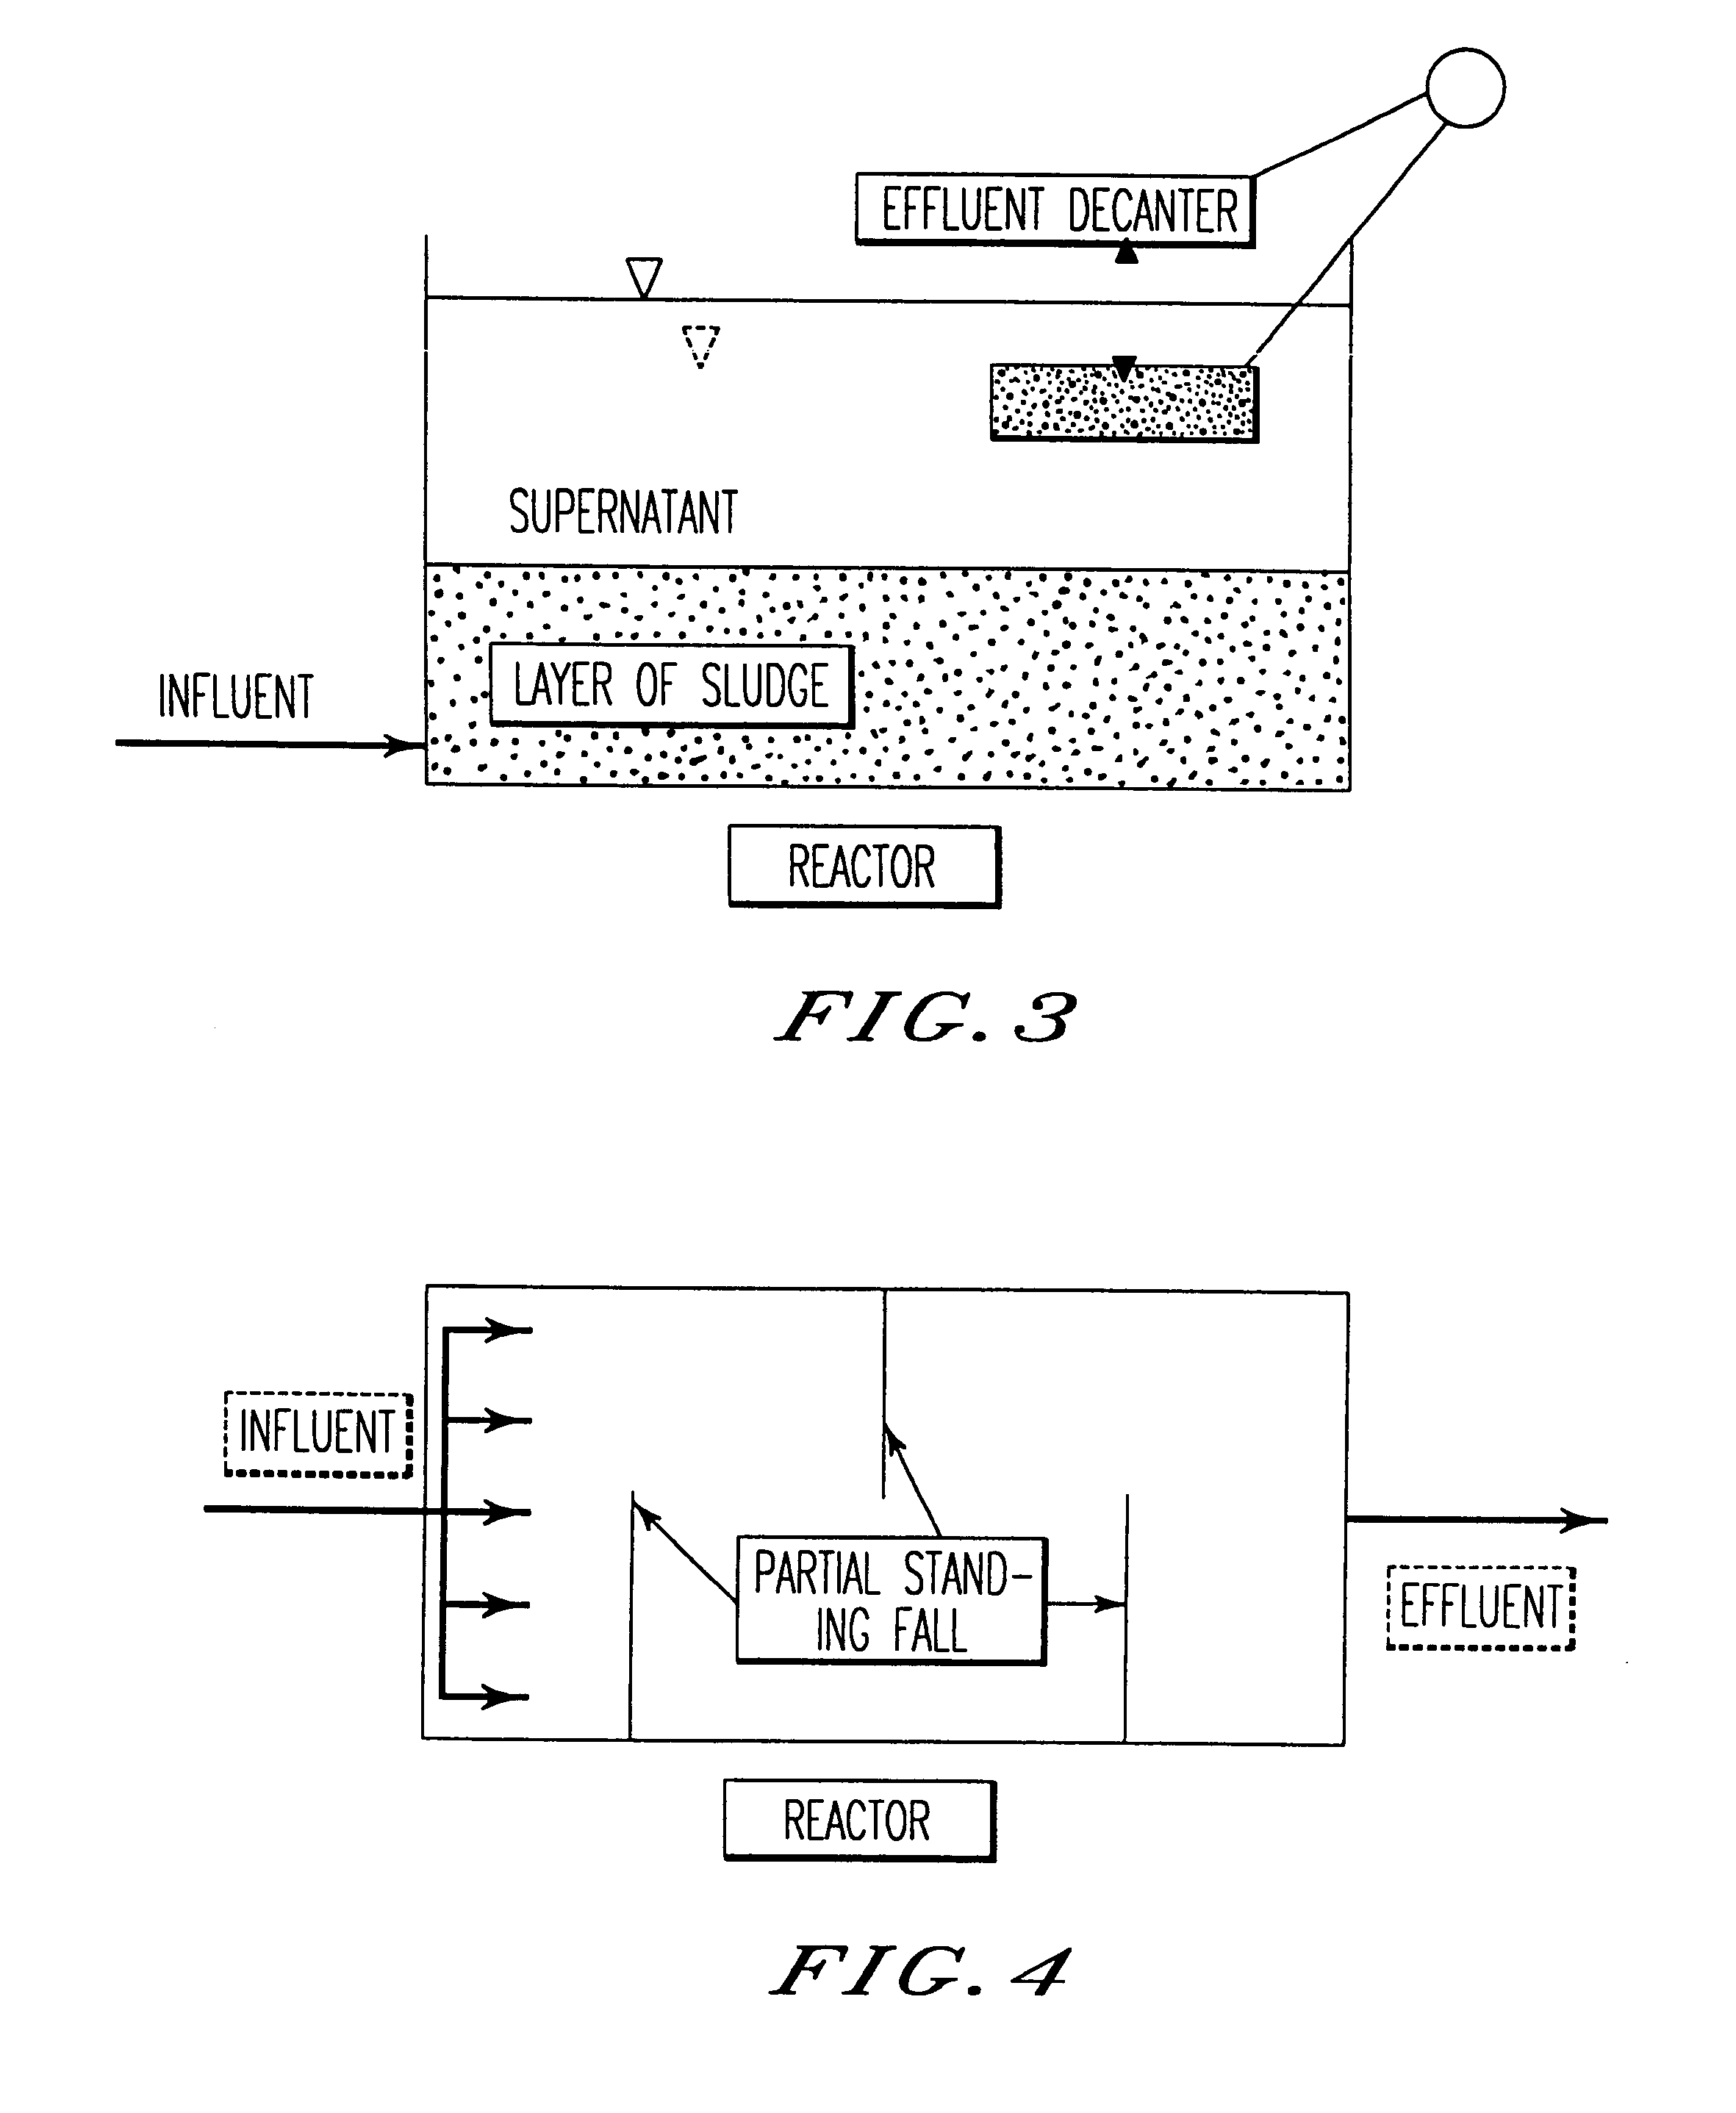 Process for wastewater treatment using intermittently decanted extended aeration process